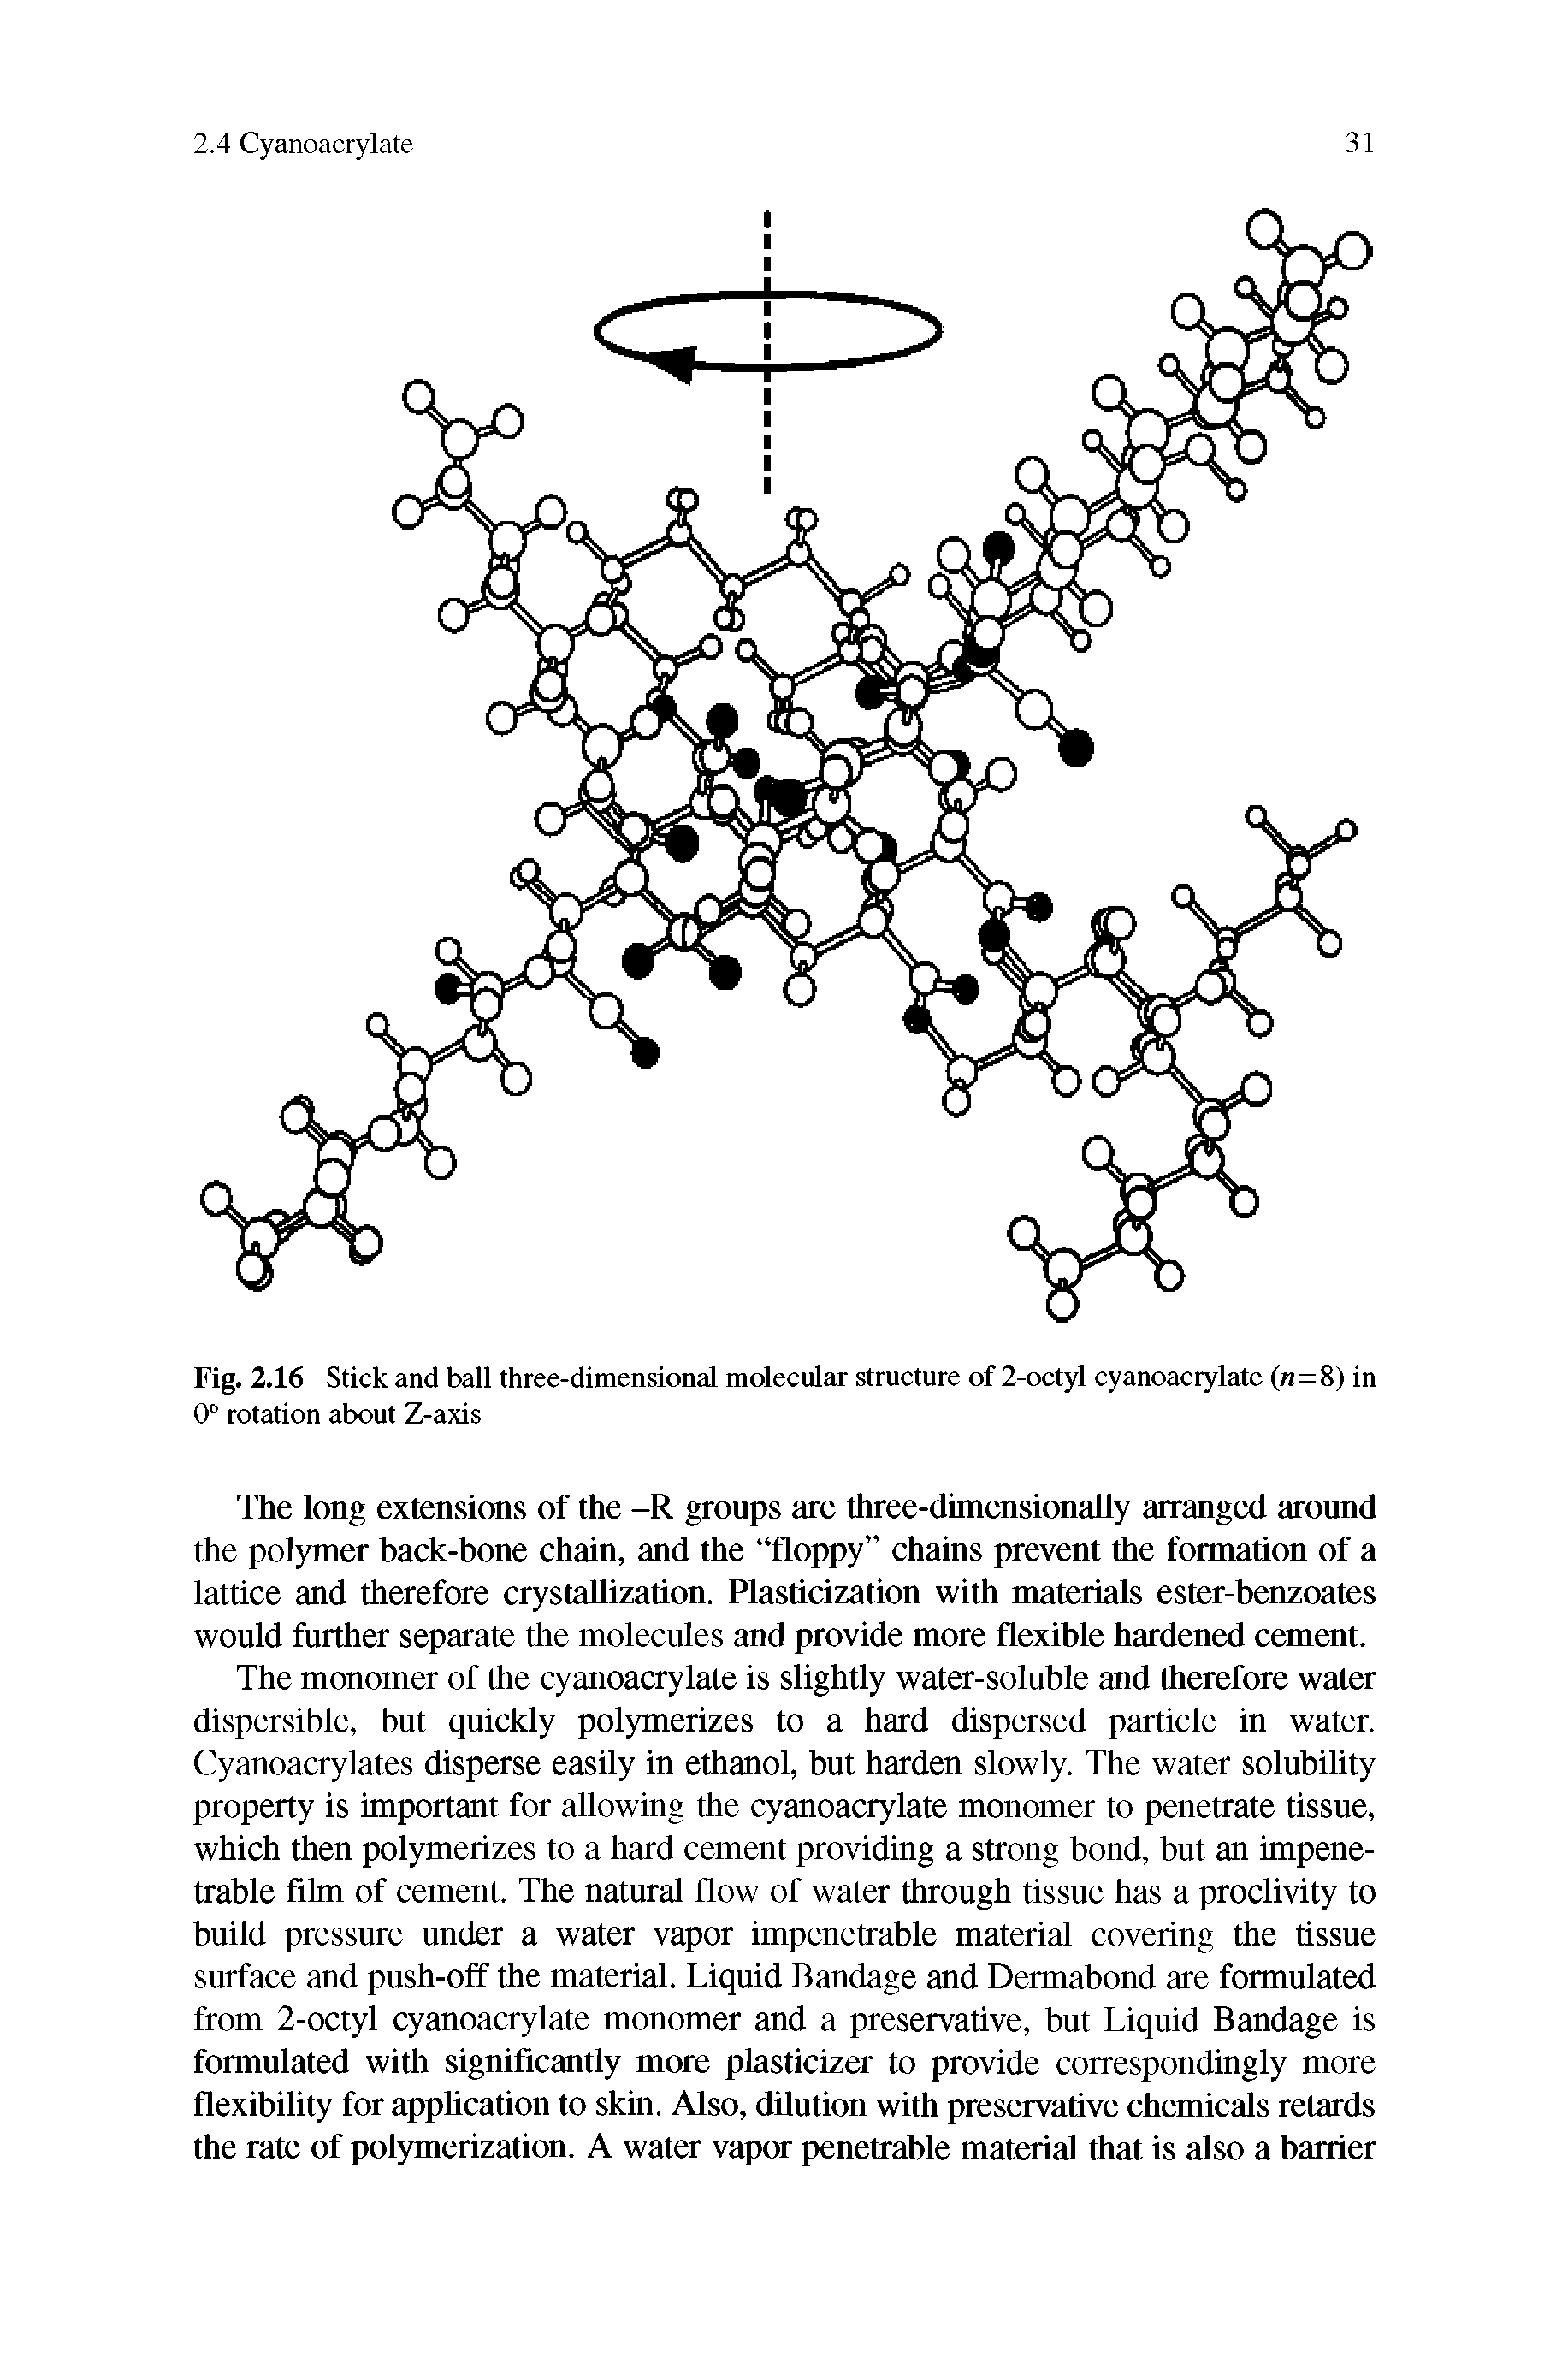 Fig. 2.16 Stick and ball three-dimensional molecular structure of 2-octyl cyanoacrylate (n=8) in 0° rotation about Z-axis...